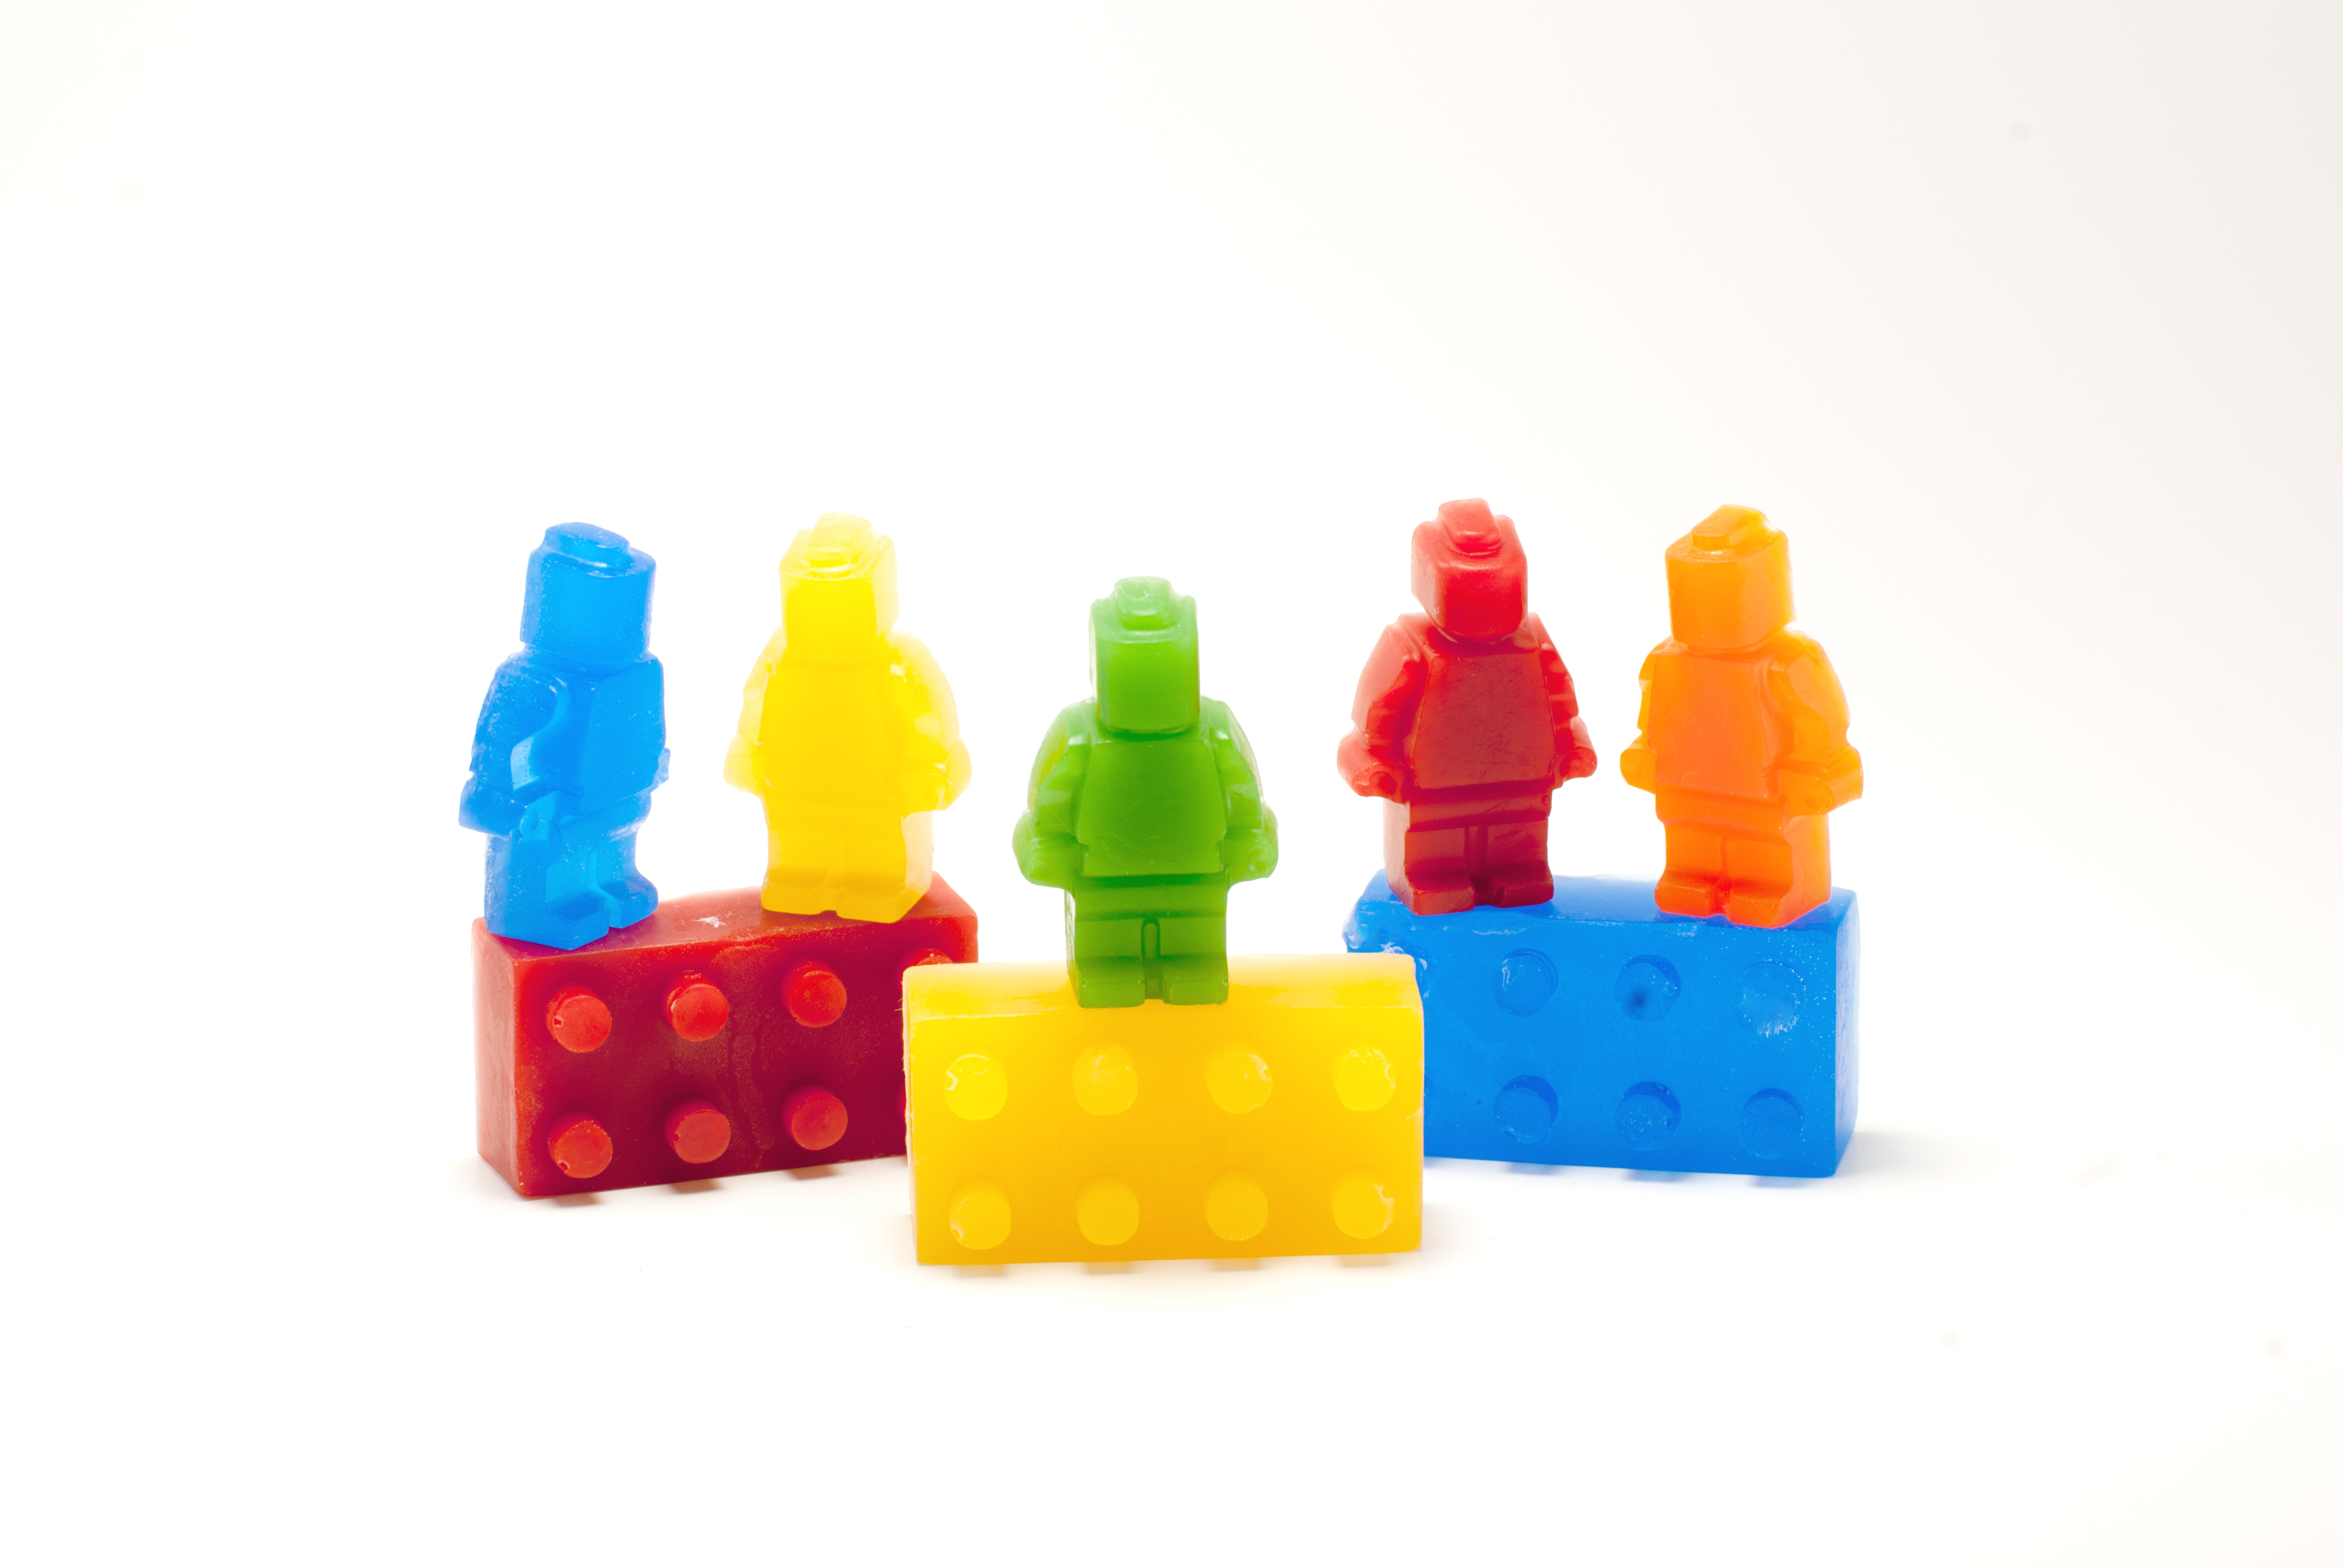 Organic Figurine and Block soaps for little hands